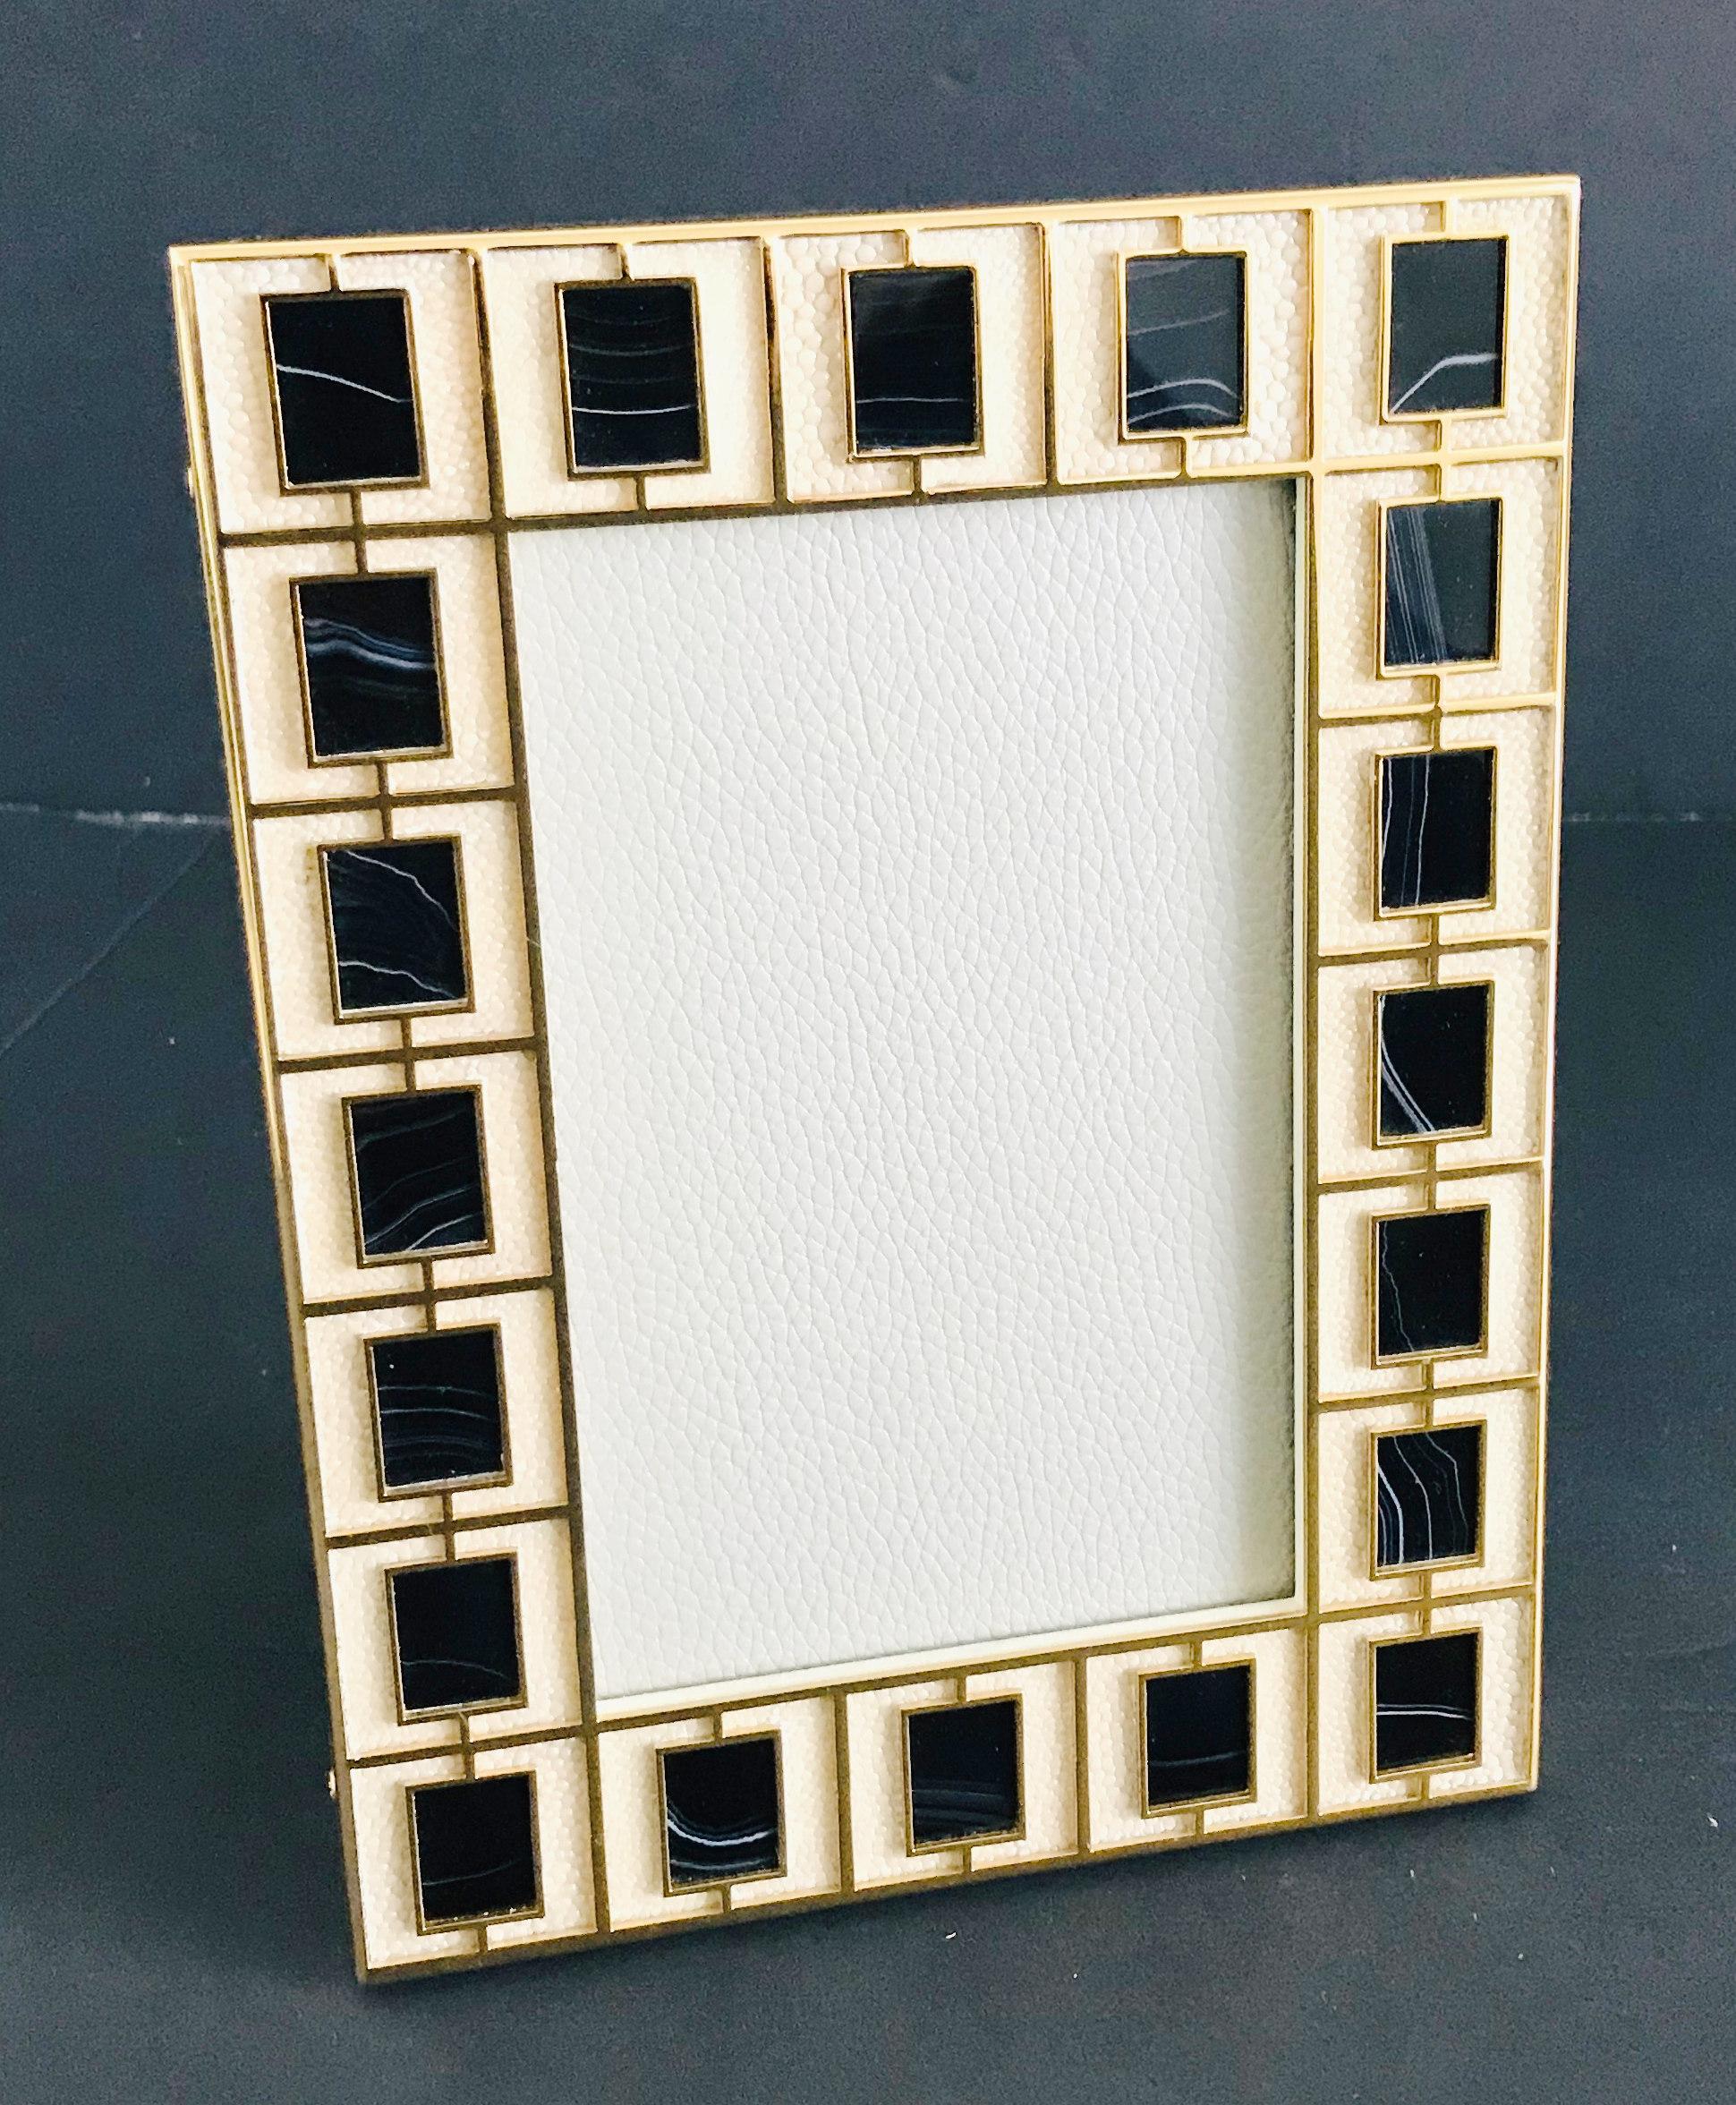 Ivory shagreen leather with black jade stones and gold-plated picture frame by Fabio Ltd
Height: 8 inches / Width: 6 inches / Depth: 1 inch
Photo size: 4 inches by 6 inches
1 in stock in Palm Springs currently ON 30% OFF SALE for $875 !!!
Order